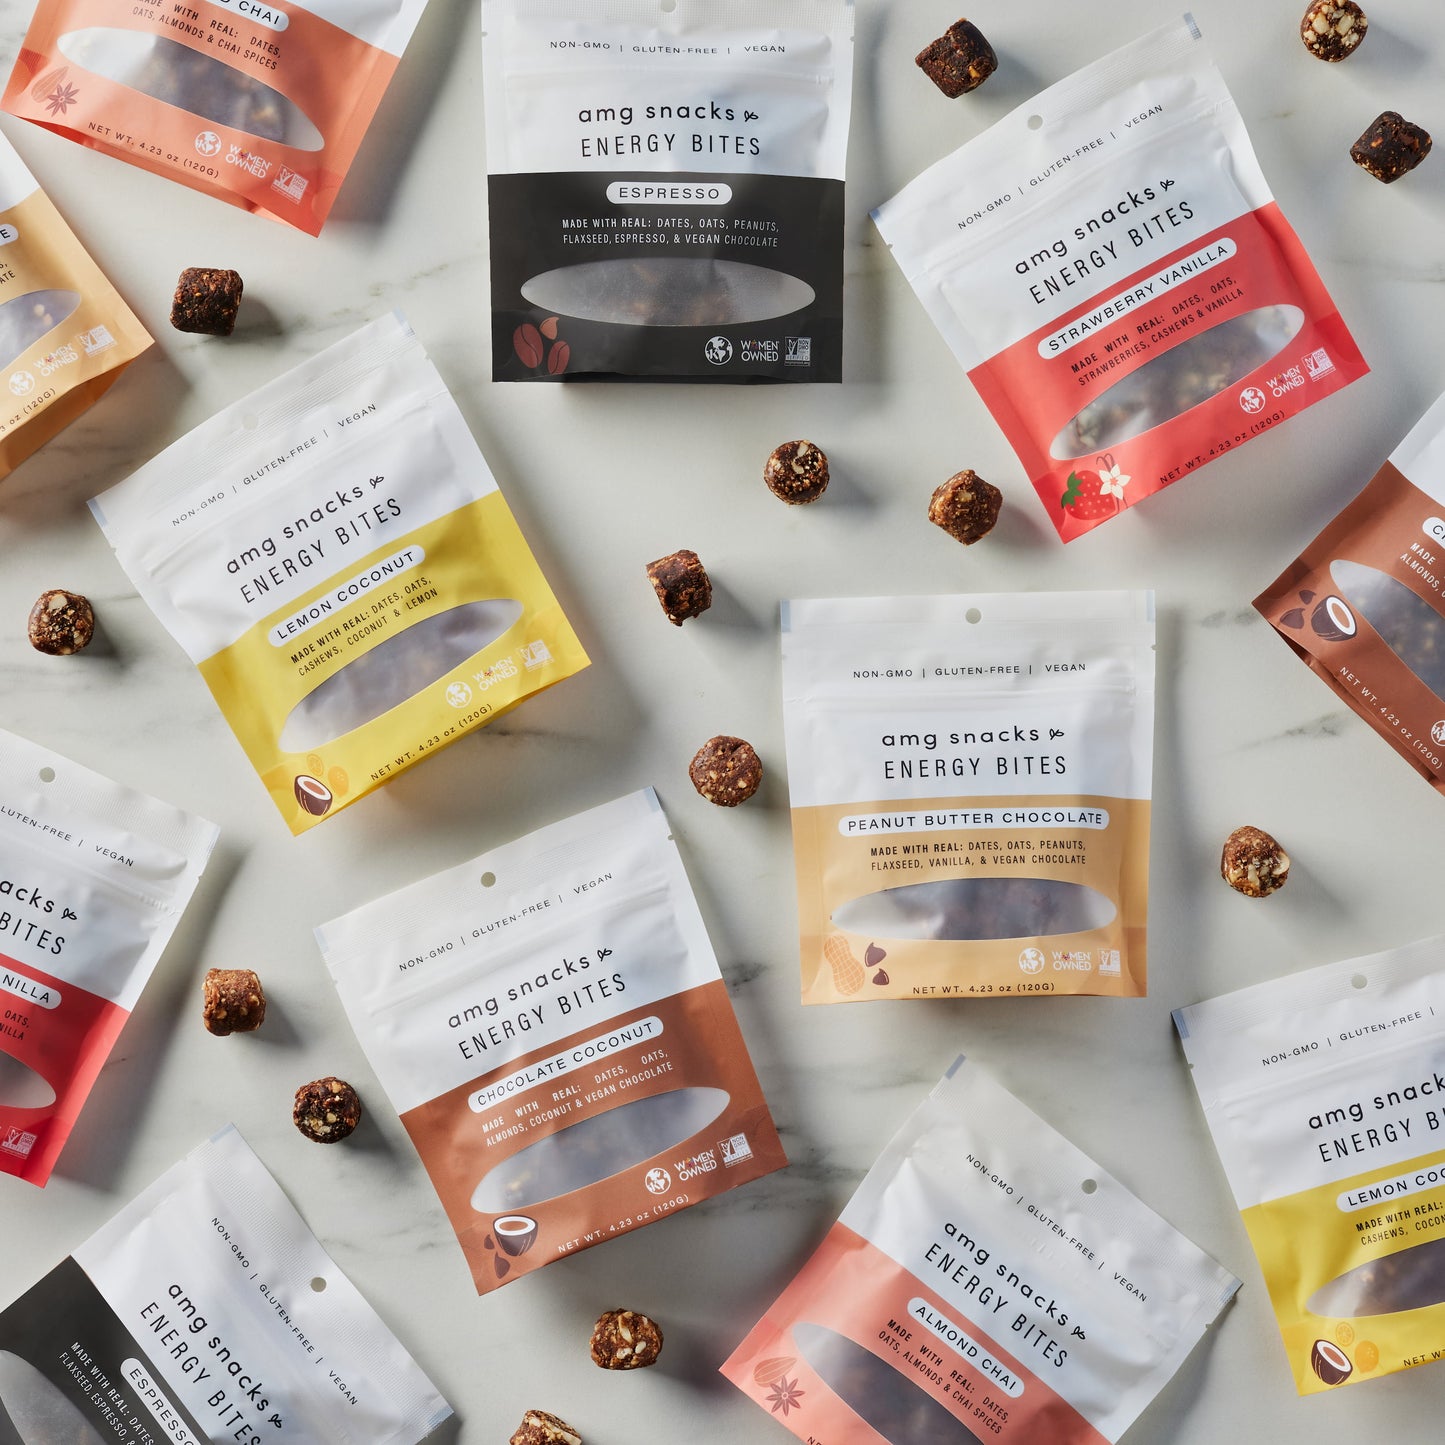 AMG Snack bags in every flavor on marble with energy bites scattered.